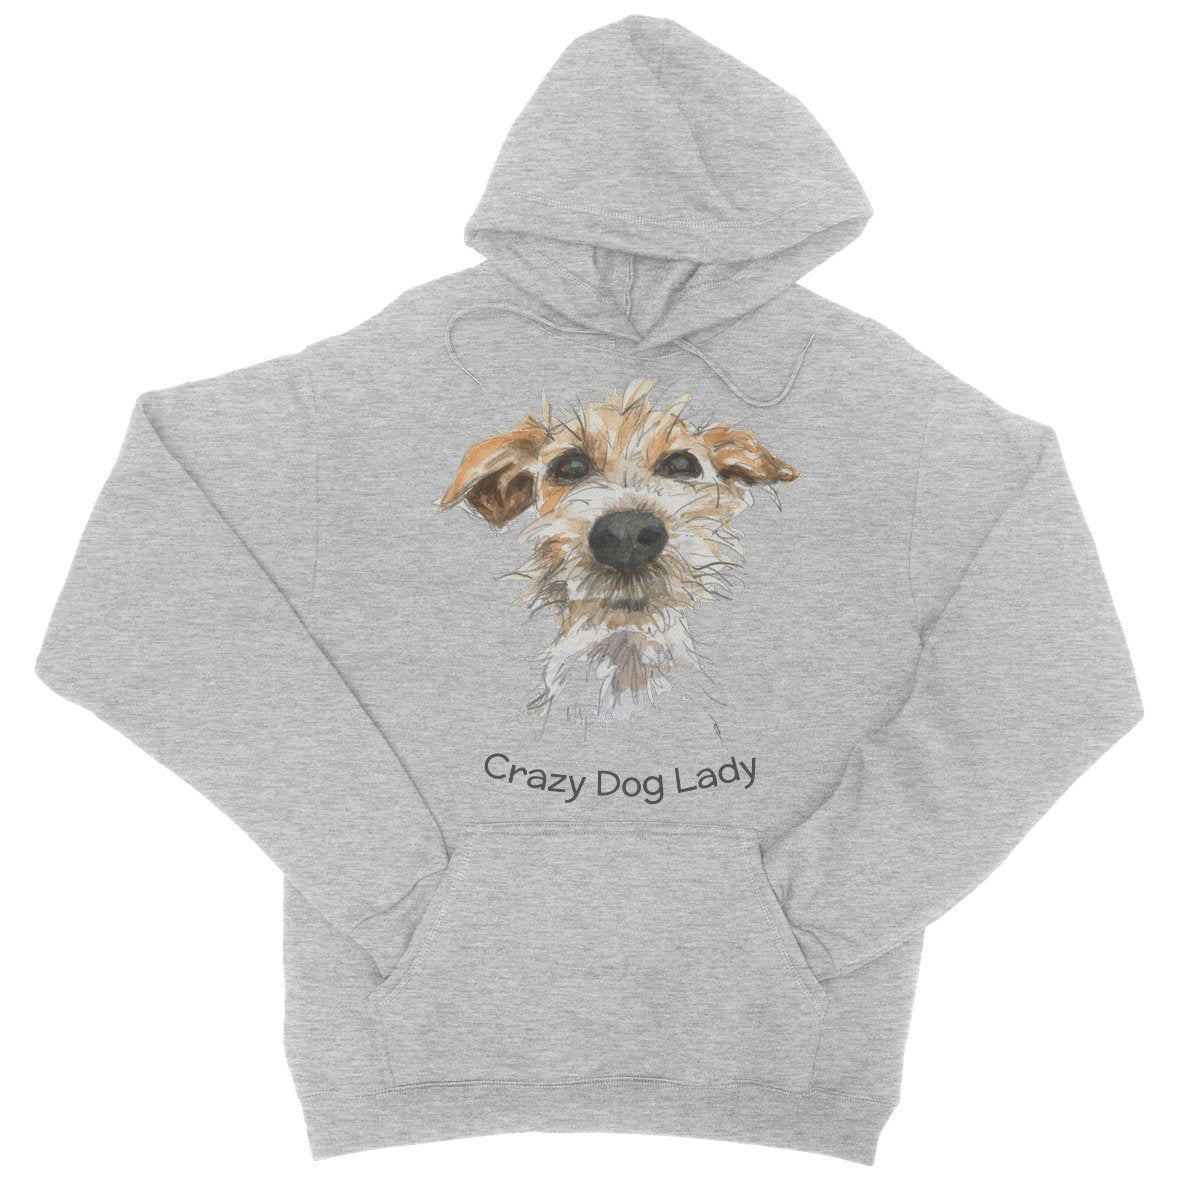 College Hoodie - 'Crazy Dog Lady'